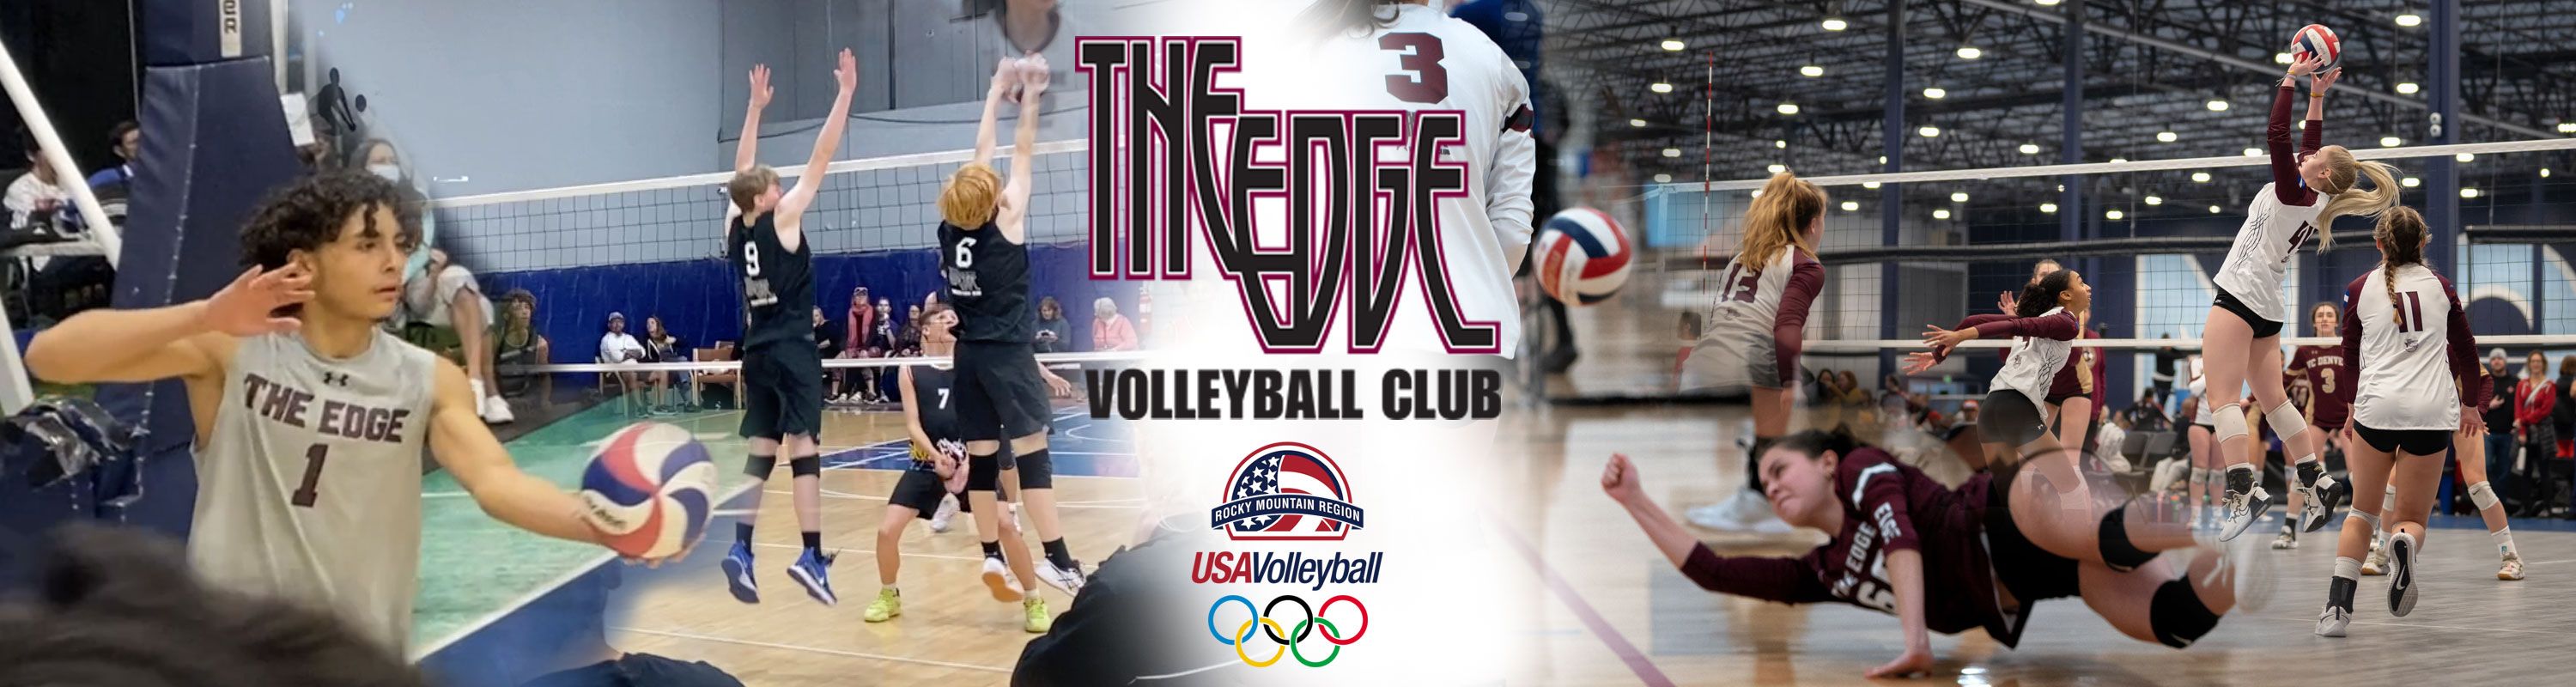 The EDGE Volleyball - Denver Area Boys and Girls USAV/AAU Volleyball Club